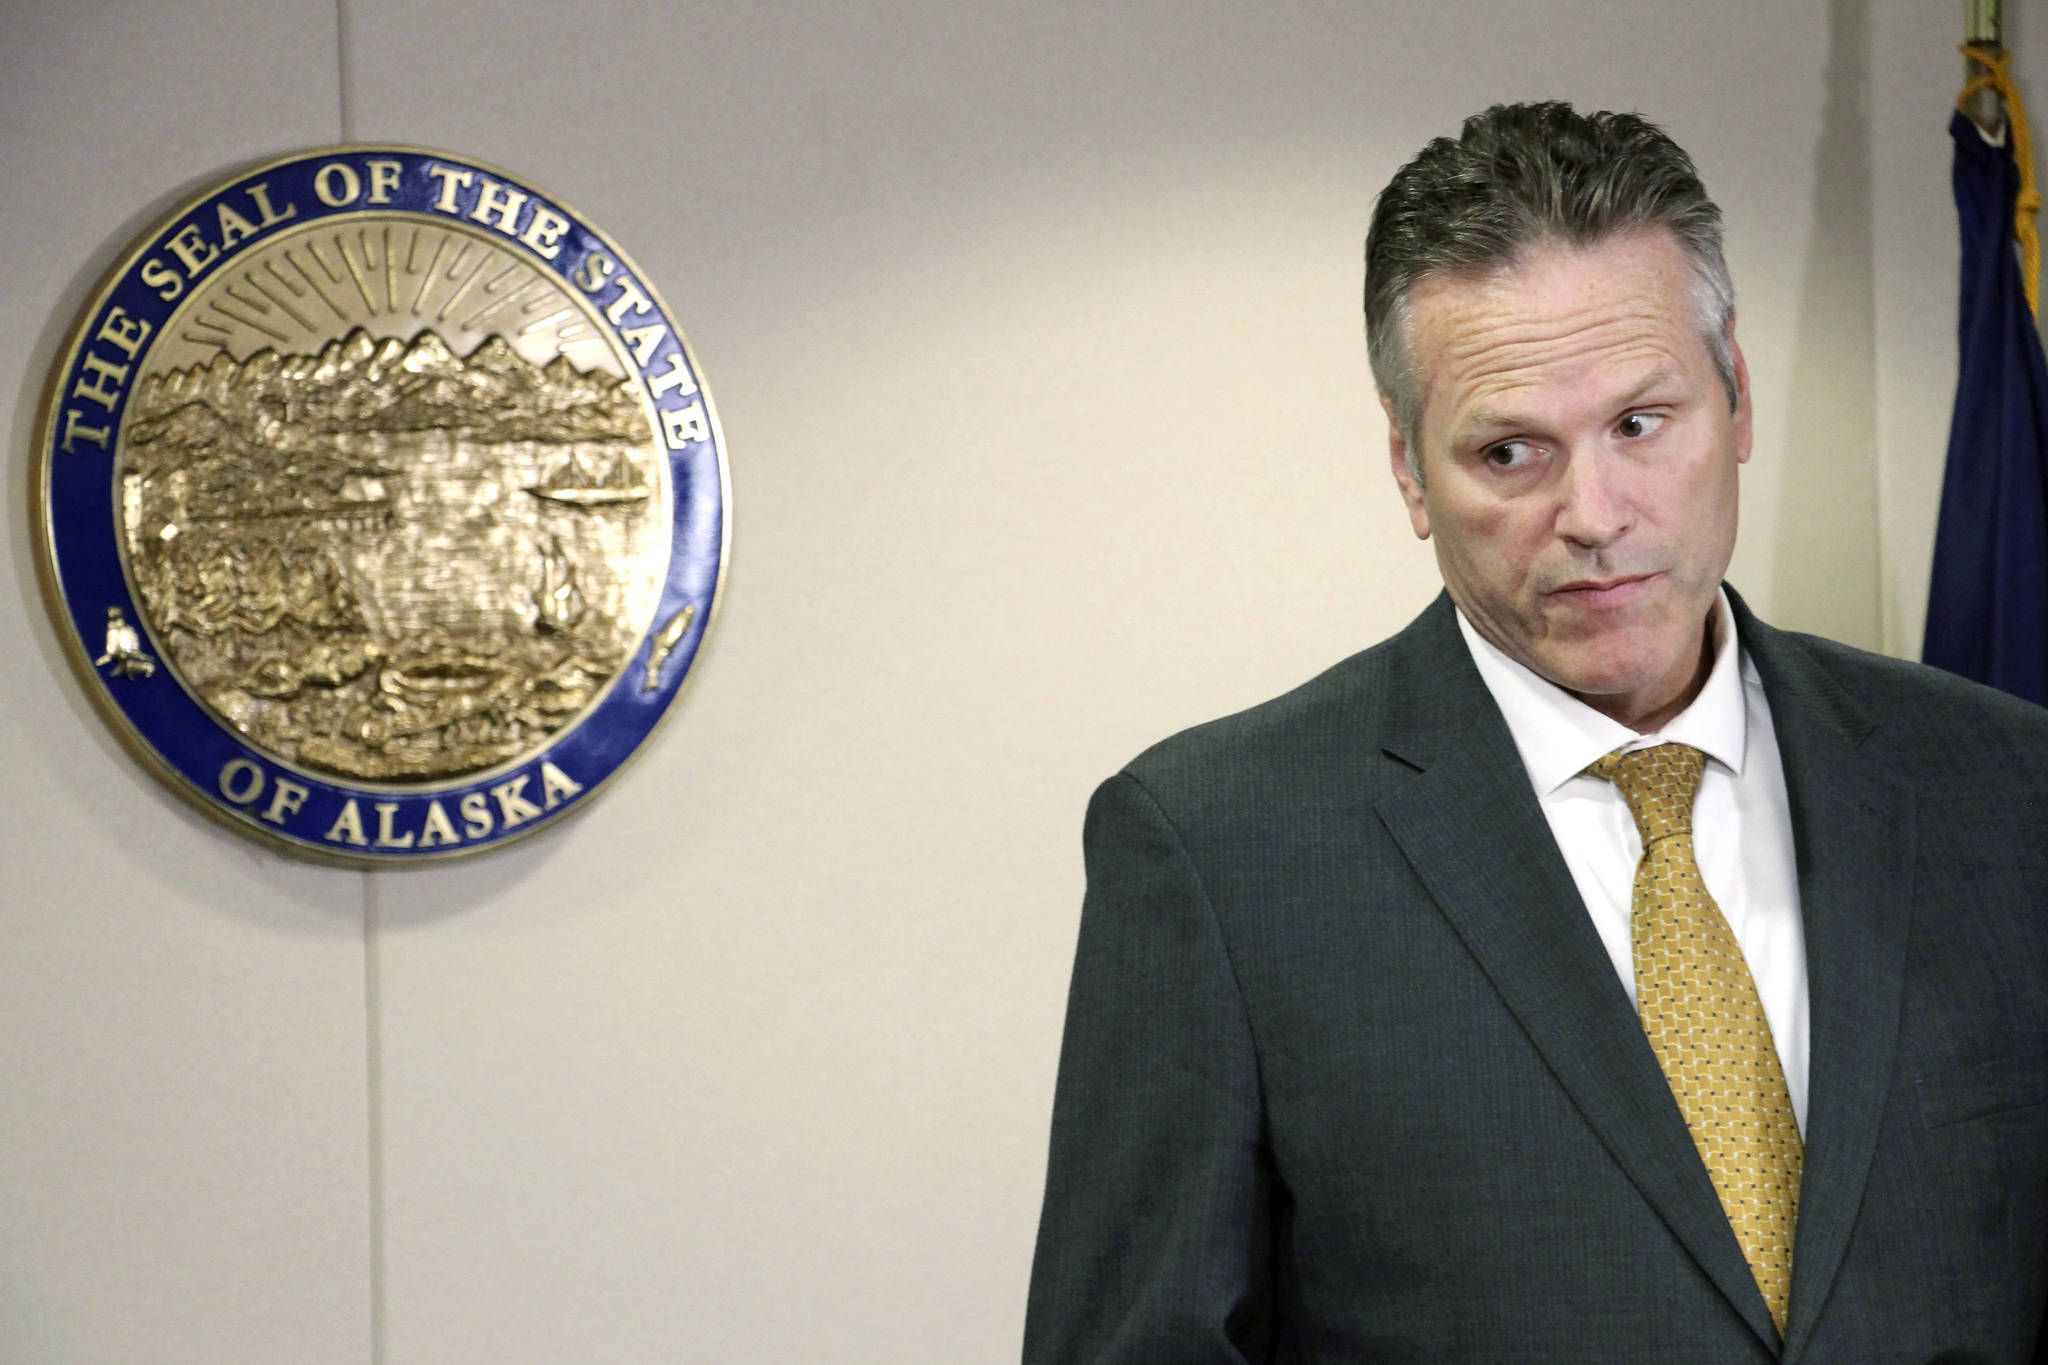 In this Sept. 26 file photo, Gov. Mike Dunleavy listens during a news conference in Anchorage. (AP Photo | Mark Thiessen)